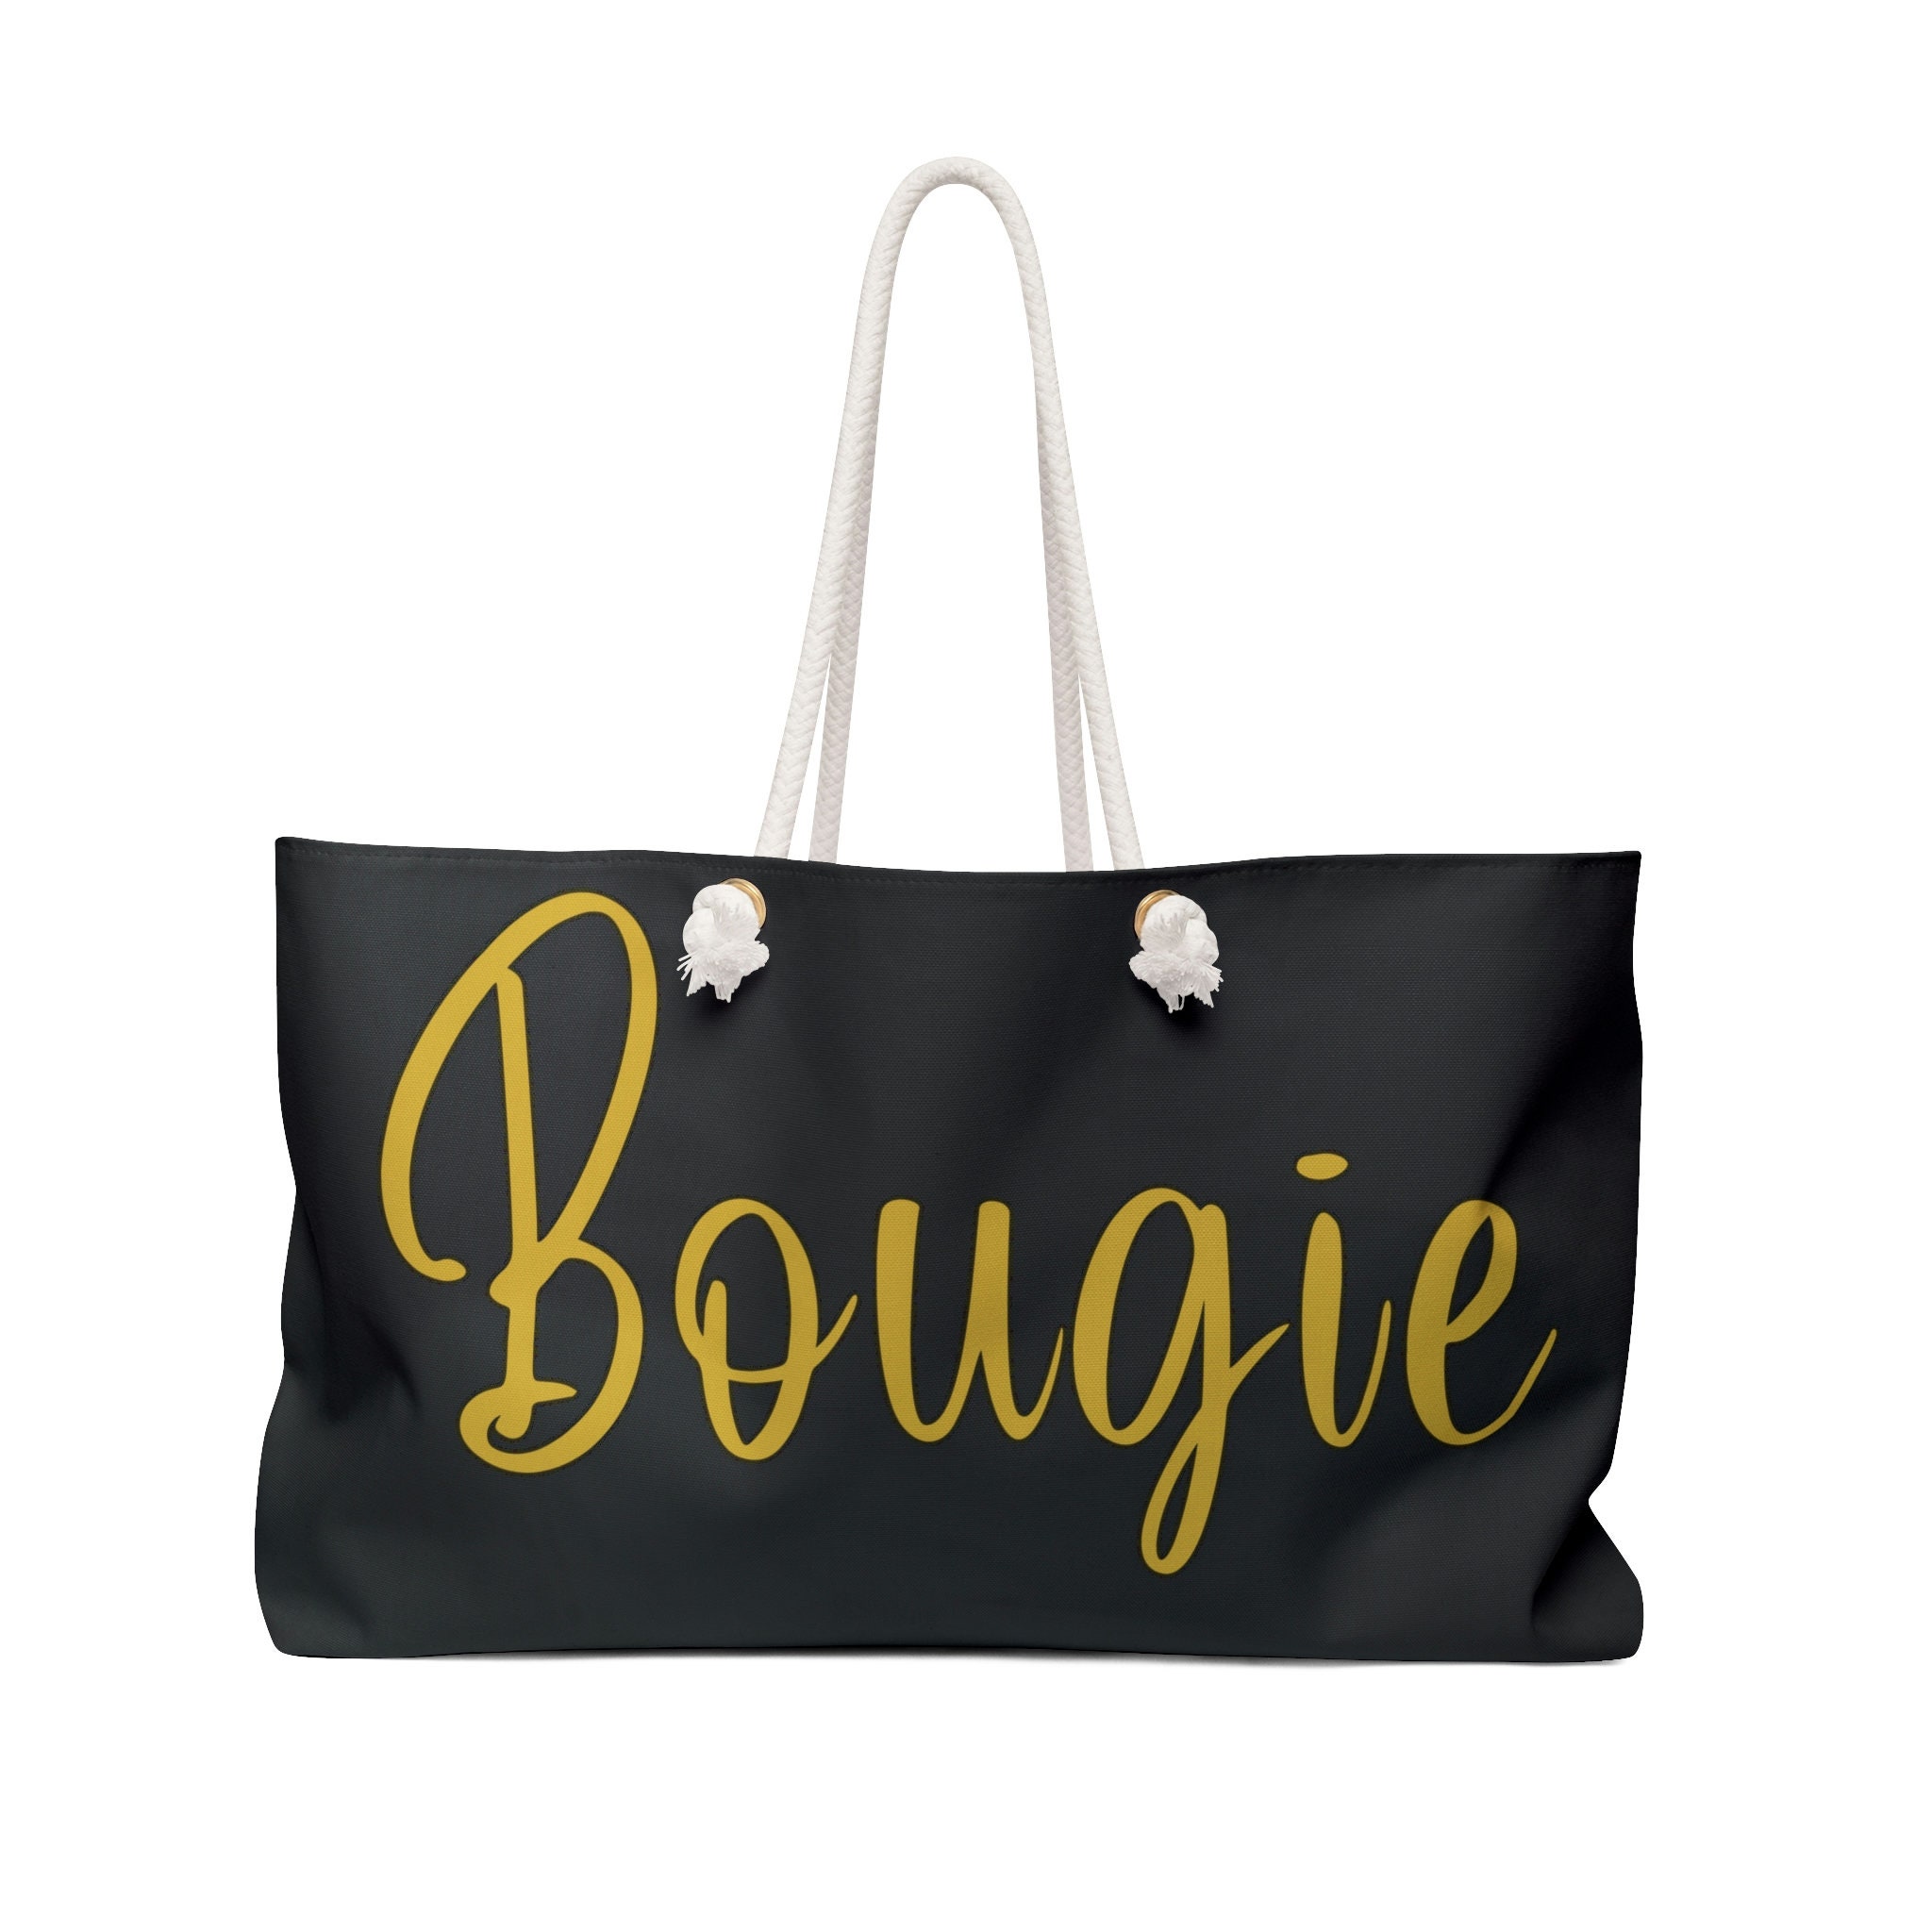 13  Bags That Look Super Bougie